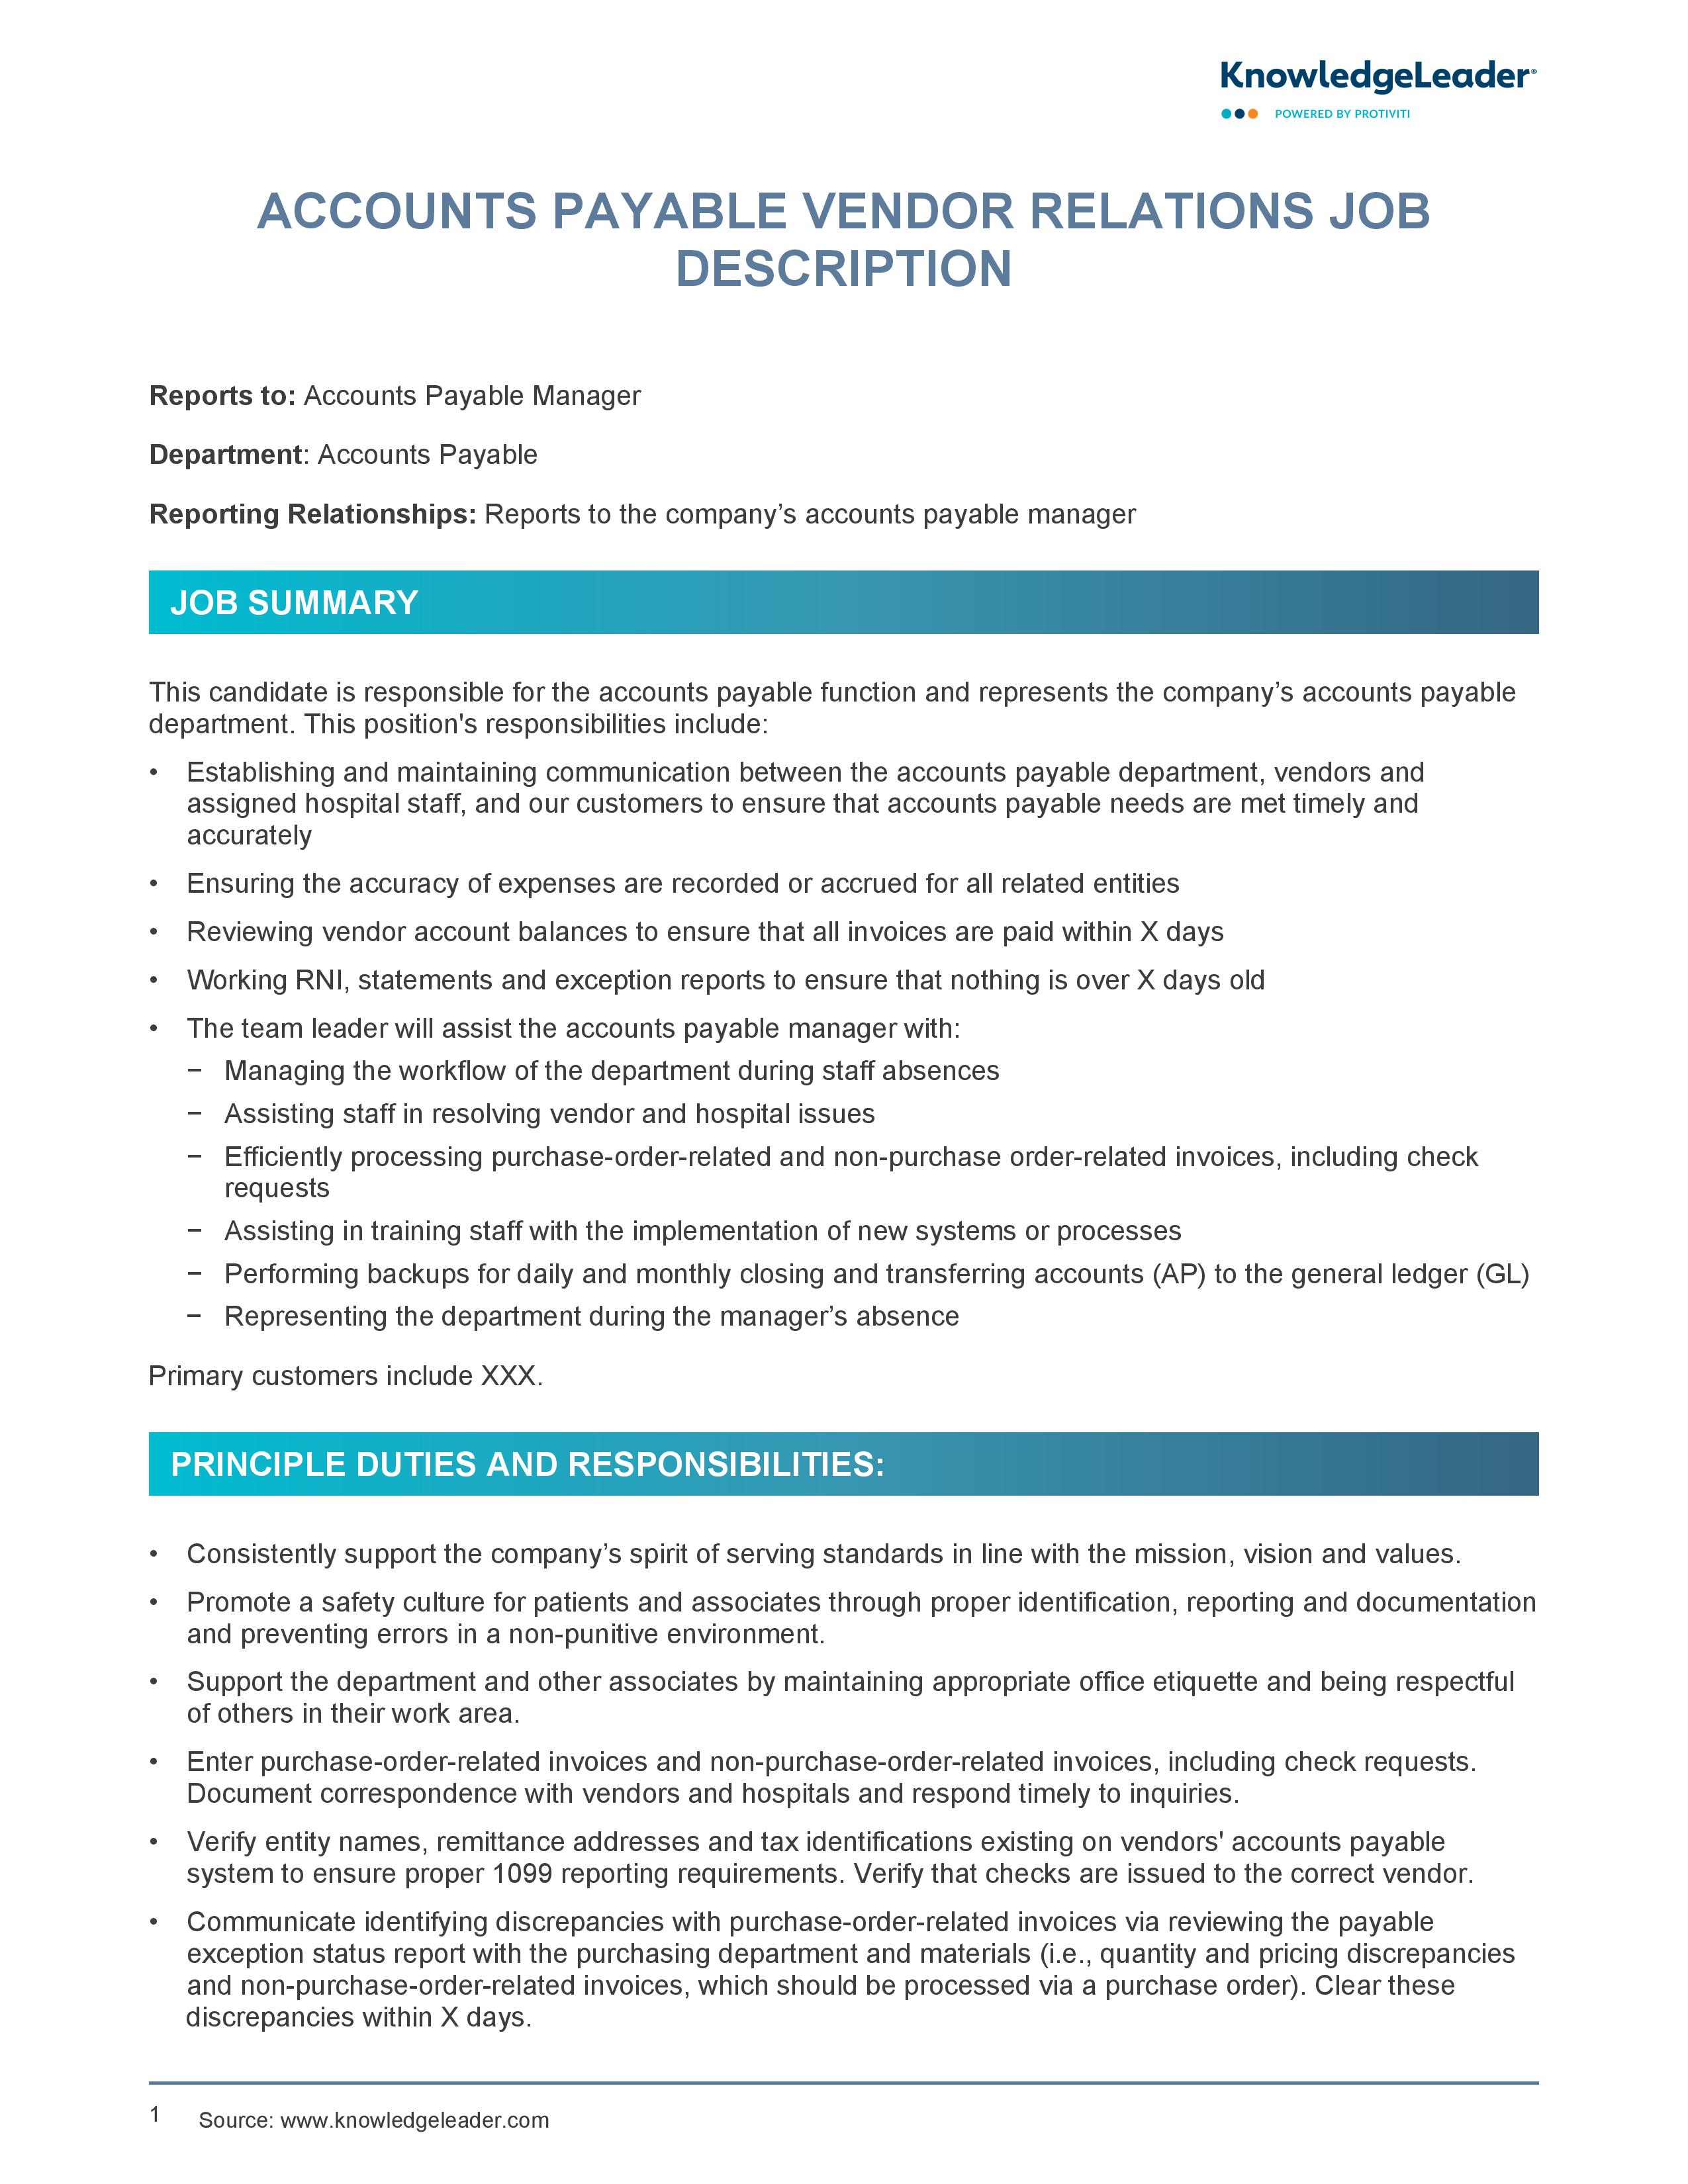 screenshot of the first page of Accounts Payable Vendor Relations Job Description